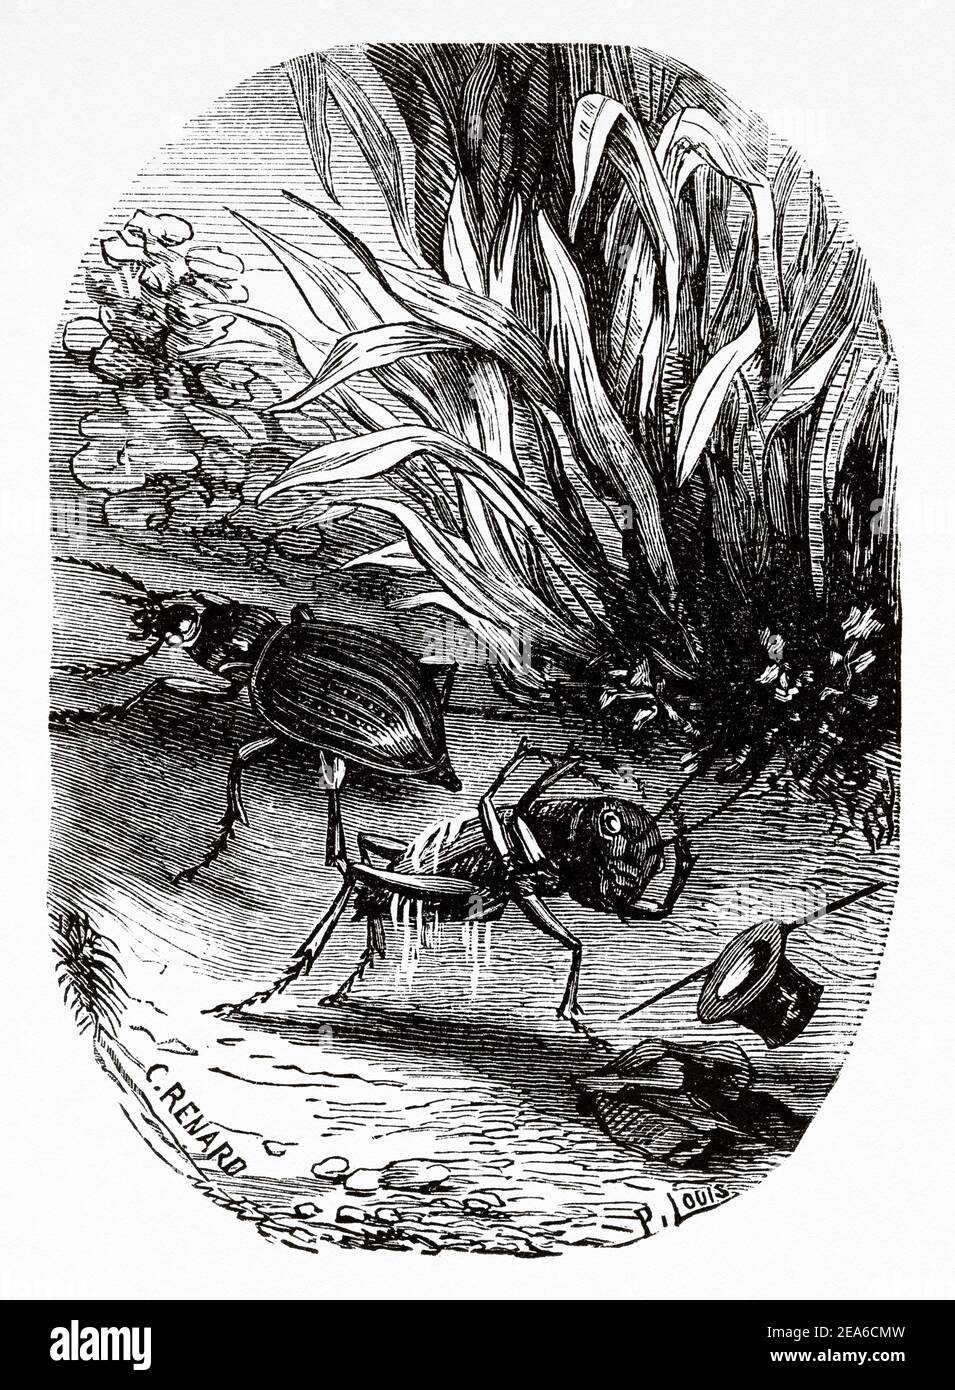 Old illustration from the nineteenth century of Adventures of a cricket by Ernest Charles Auguste Candèze (1827-1898) Belgian doctor and entomologist. Old 19th century engraved illustration from El Mundo Ilustrado 1879 Stock Photo